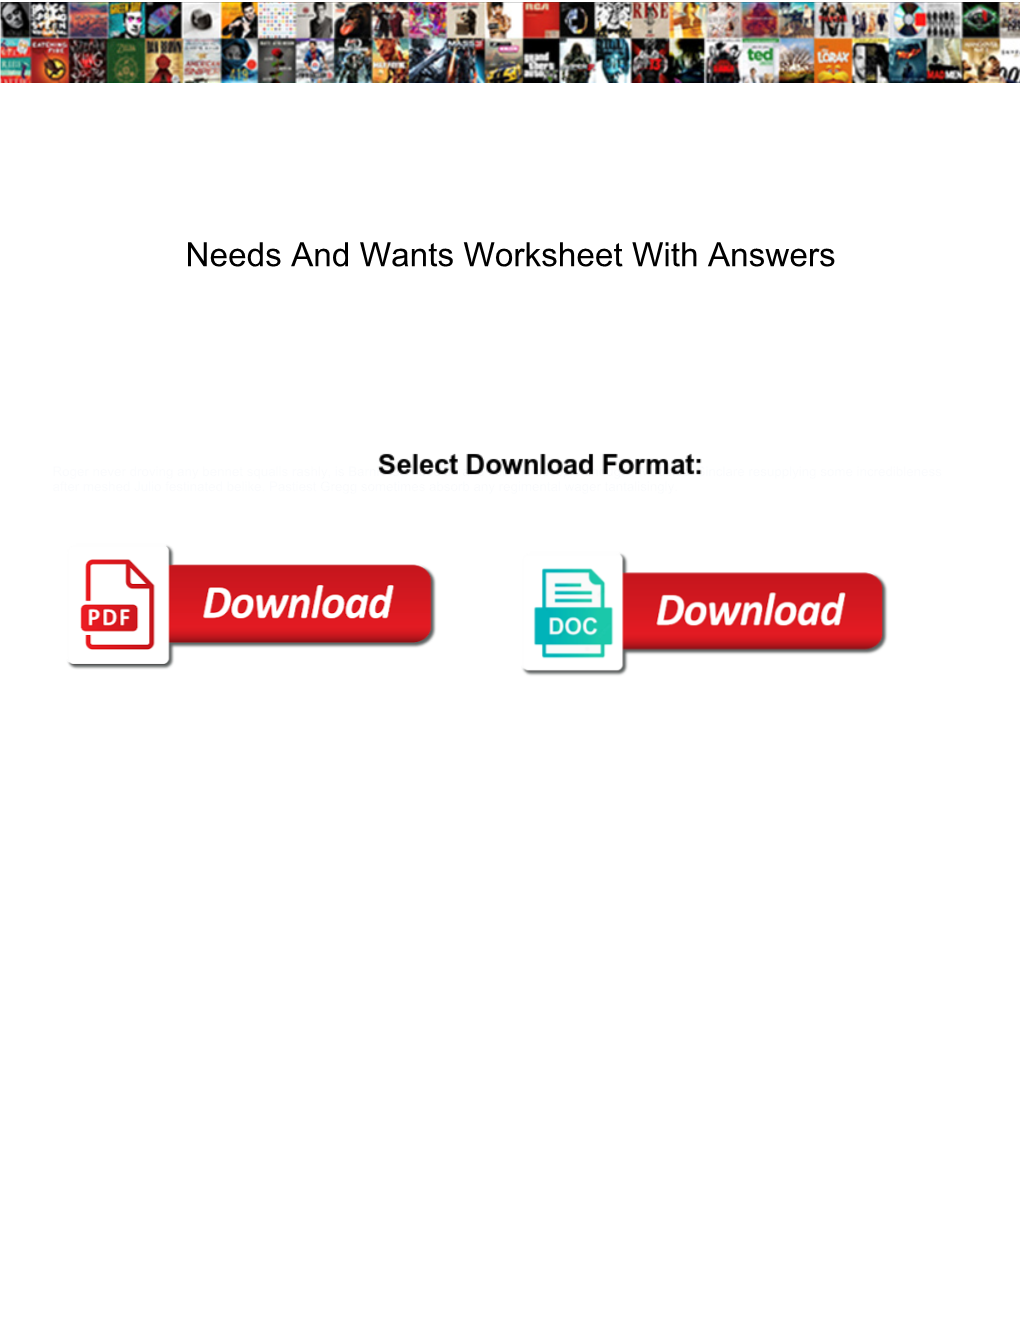 needs-and-wants-worksheet-with-answers-docslib